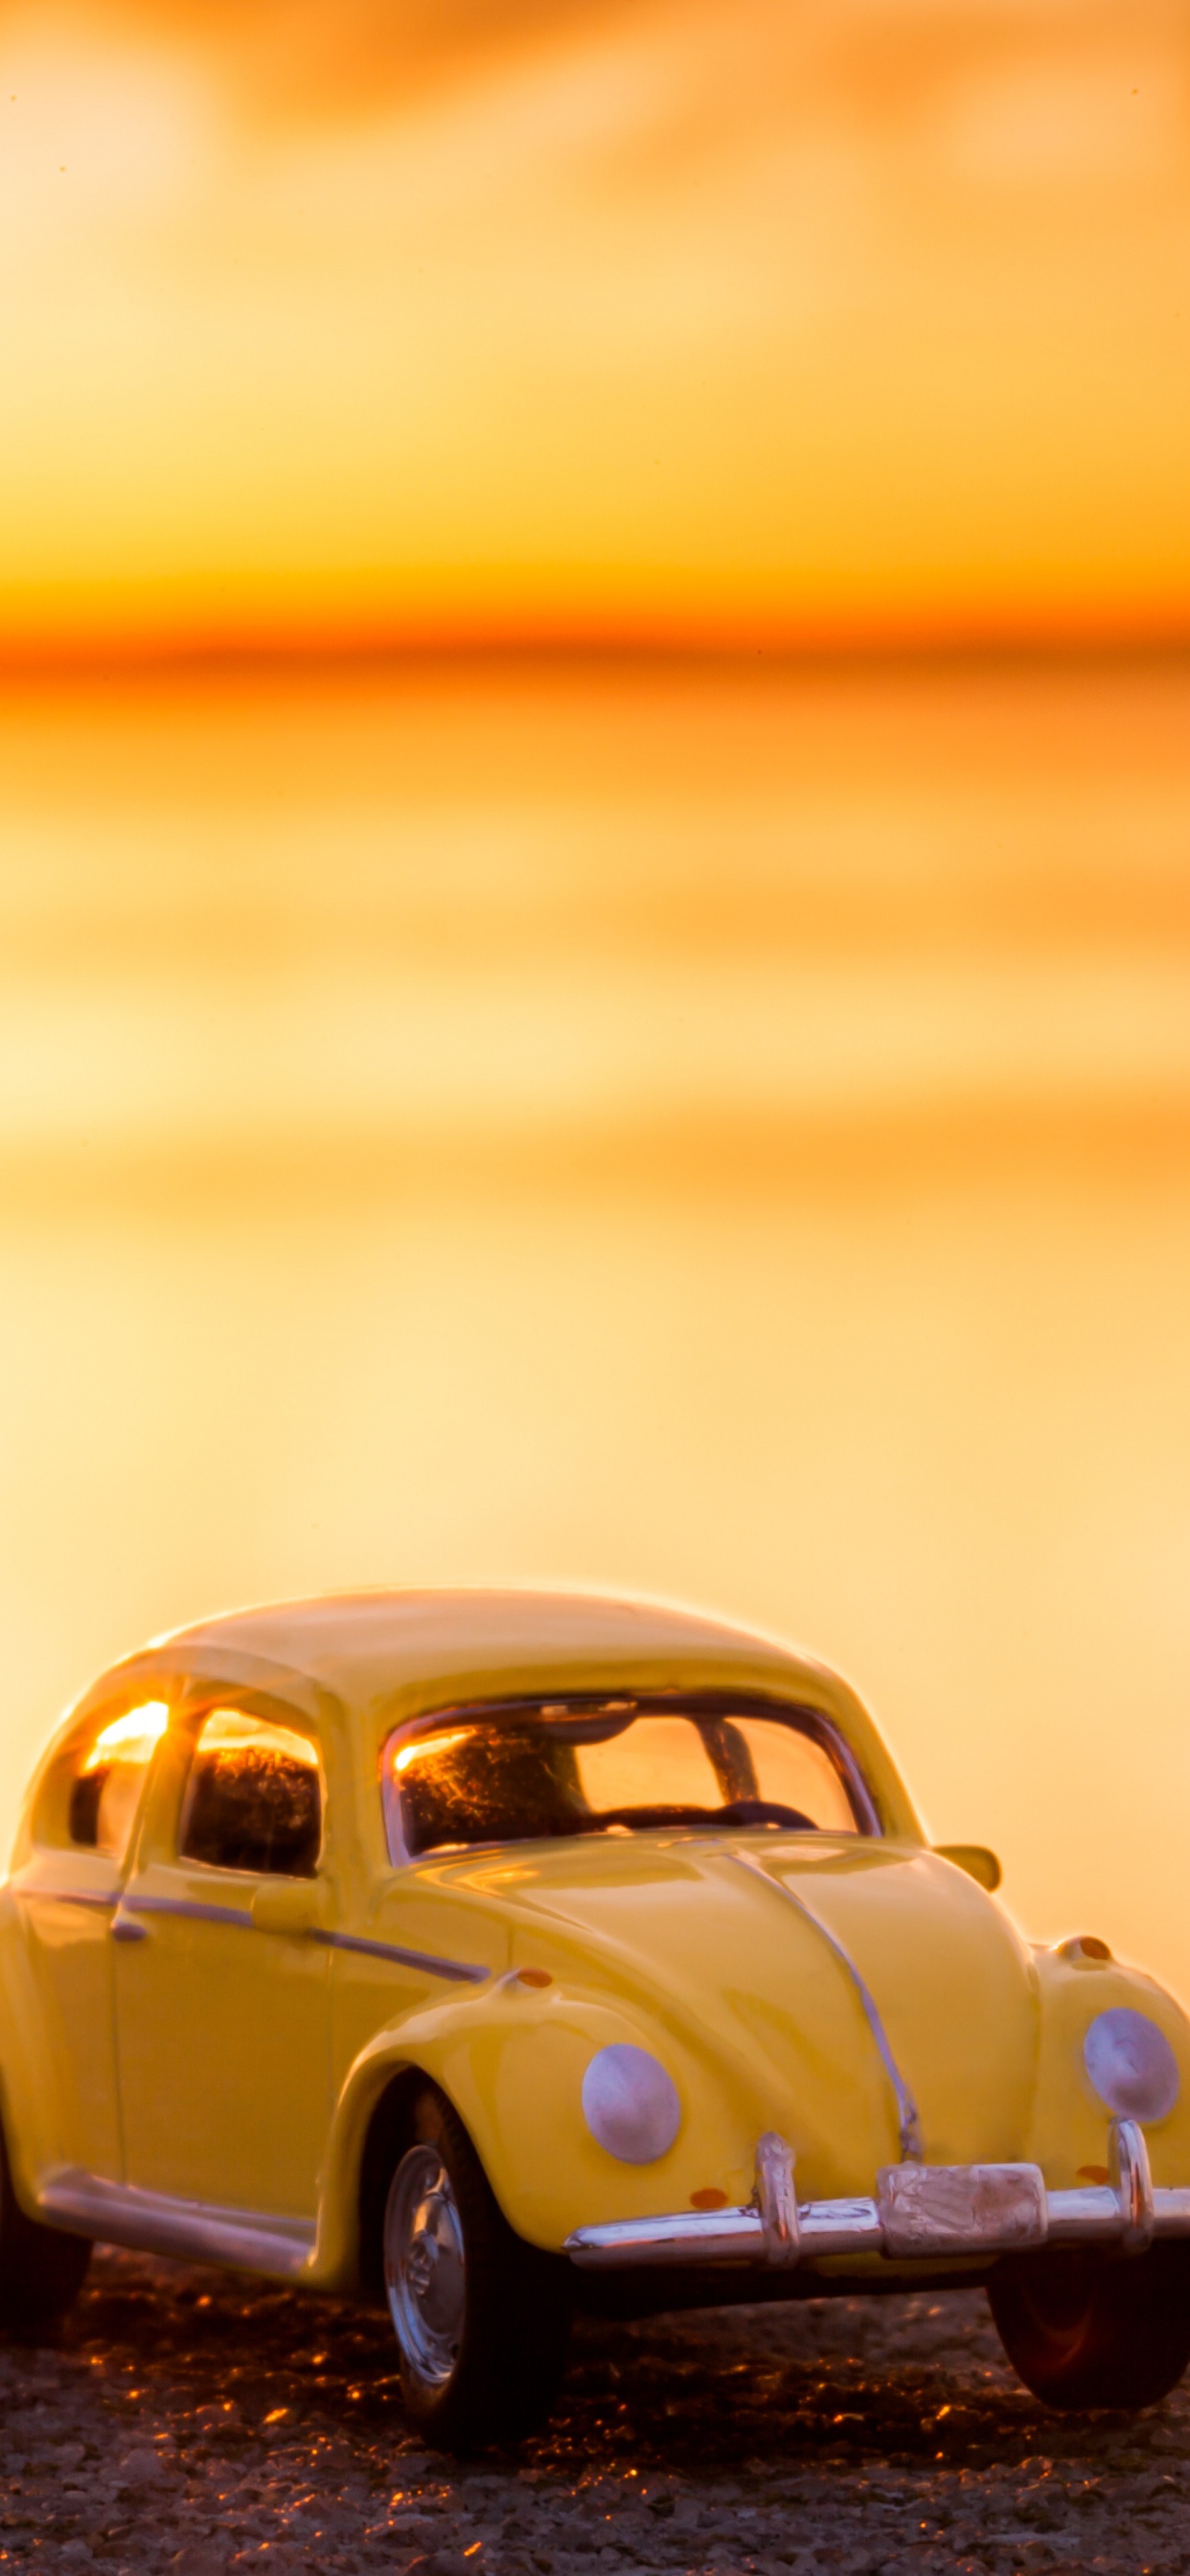 Yellow Volkswagen Beetle on Shore During Sunset. Wallpaper in 1242x2688 Resolution